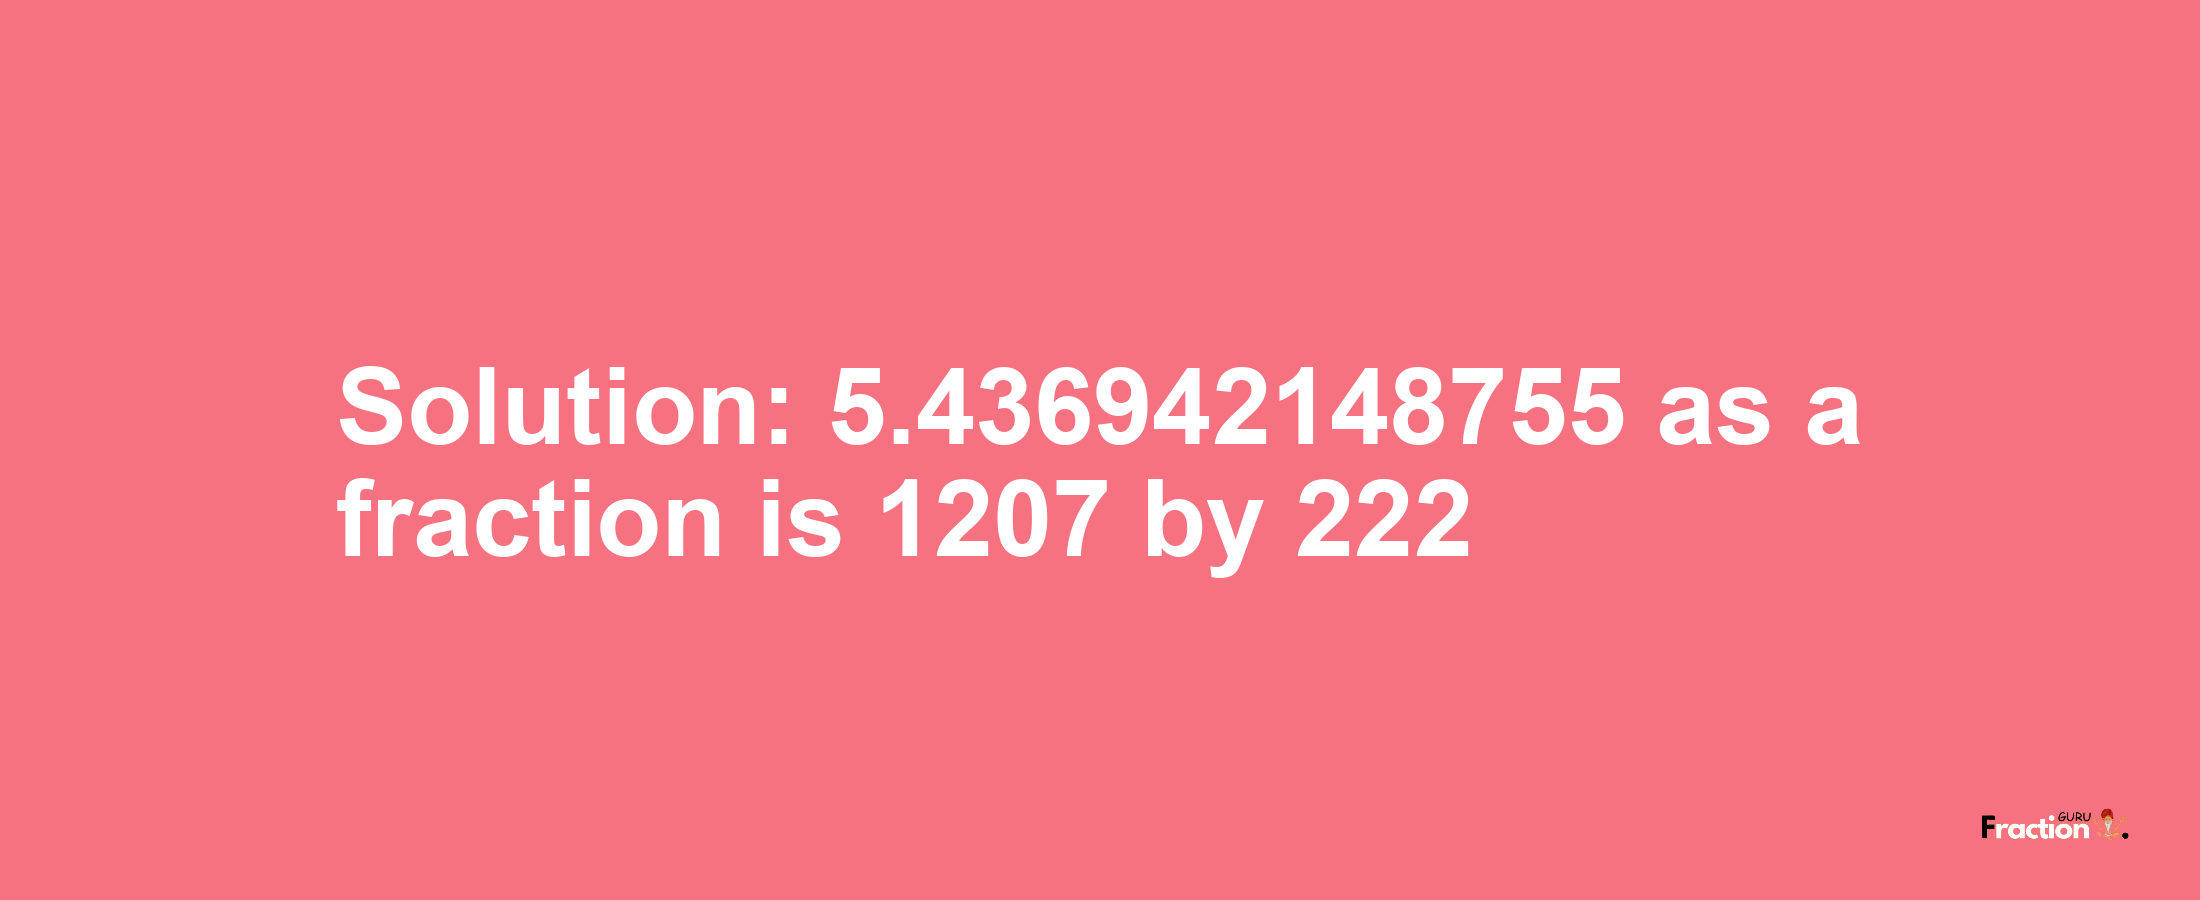 Solution:5.436942148755 as a fraction is 1207/222